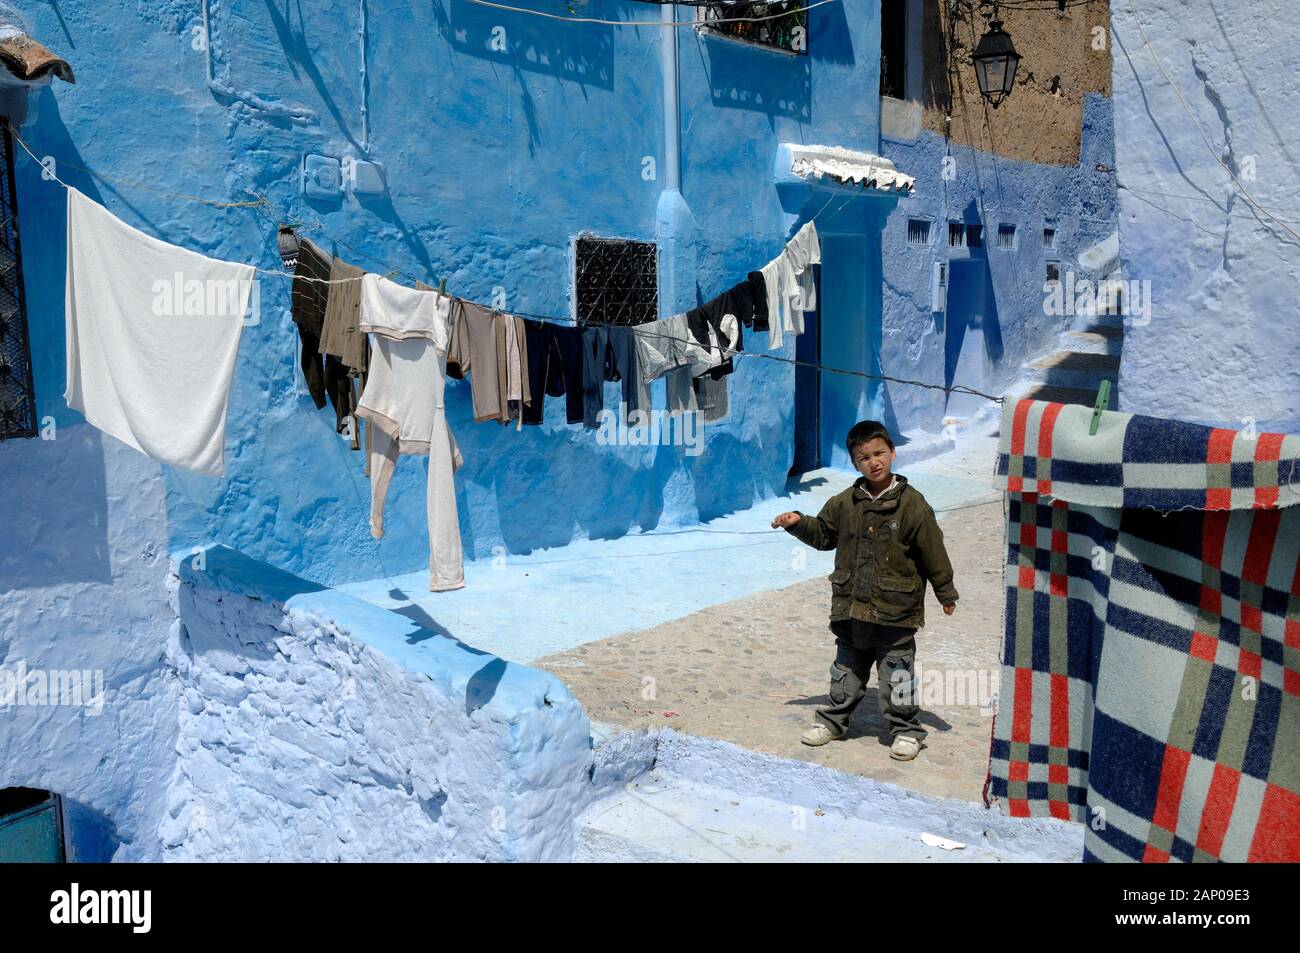 Moroocan Boy & Laundry or Washing Hanging on Washing Line in Streets of the Old Town or Medina Chefchaouen Morocco Stock Photo